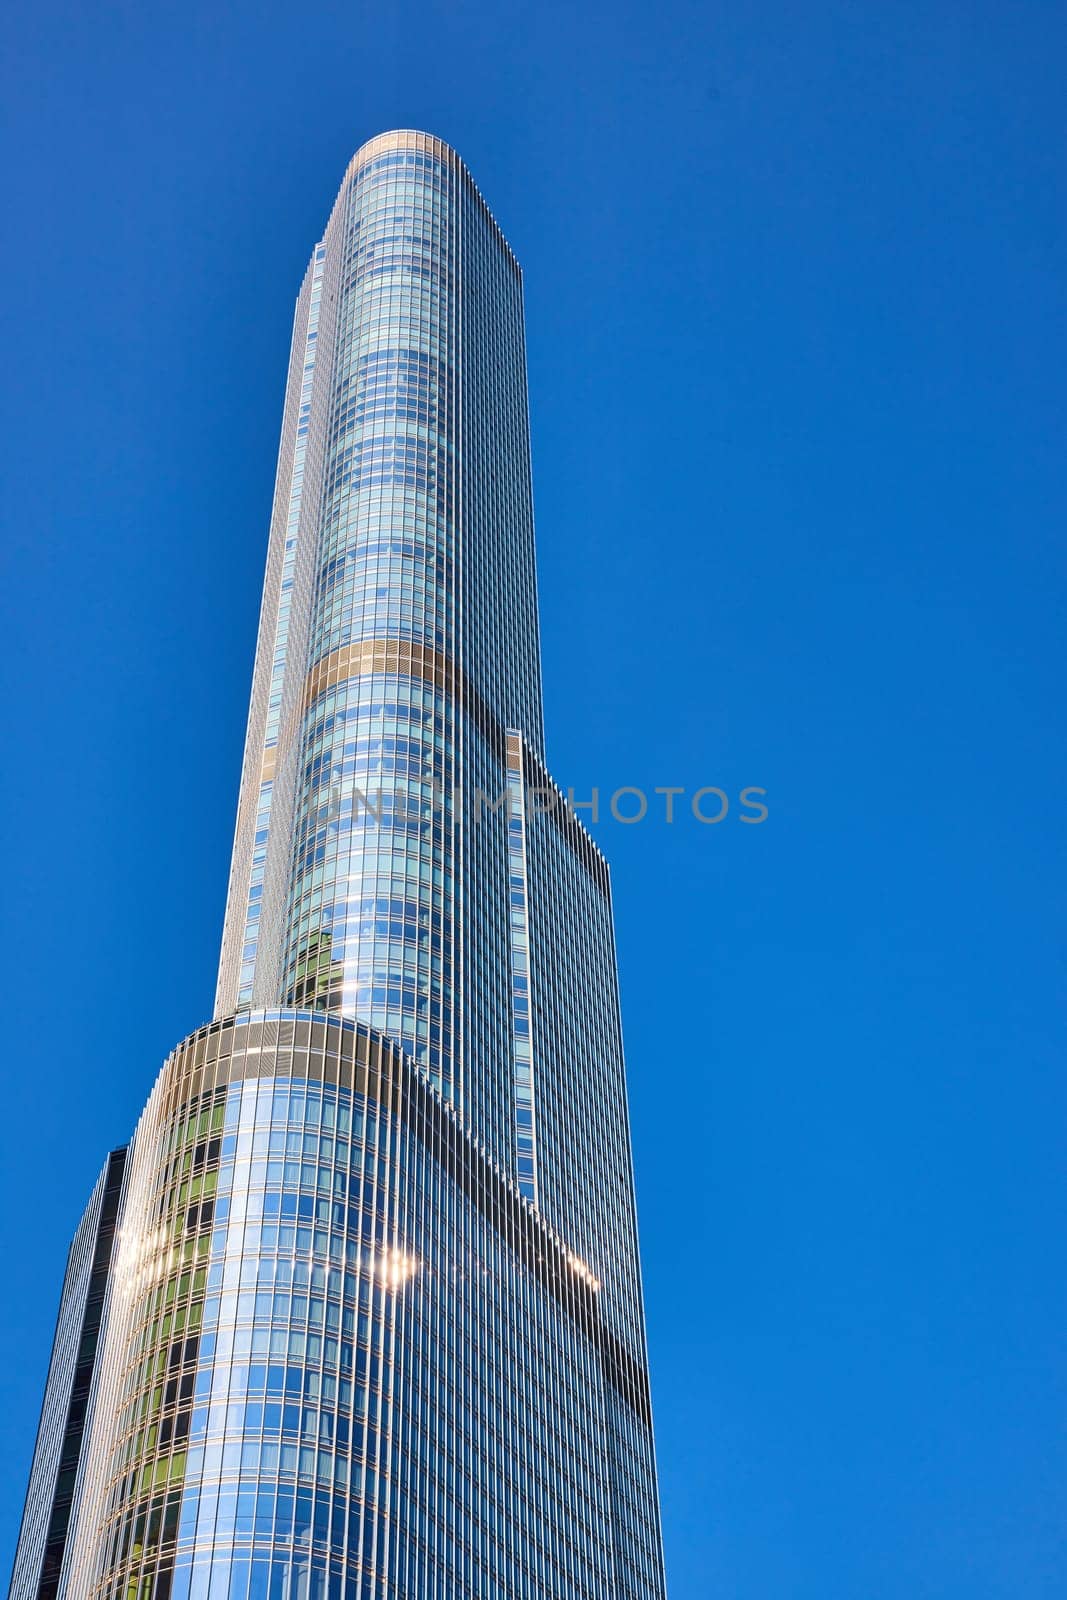 Trump Tower on bright summer day with clear blue sky above and around architecture, Chicago Illinois by njproductions